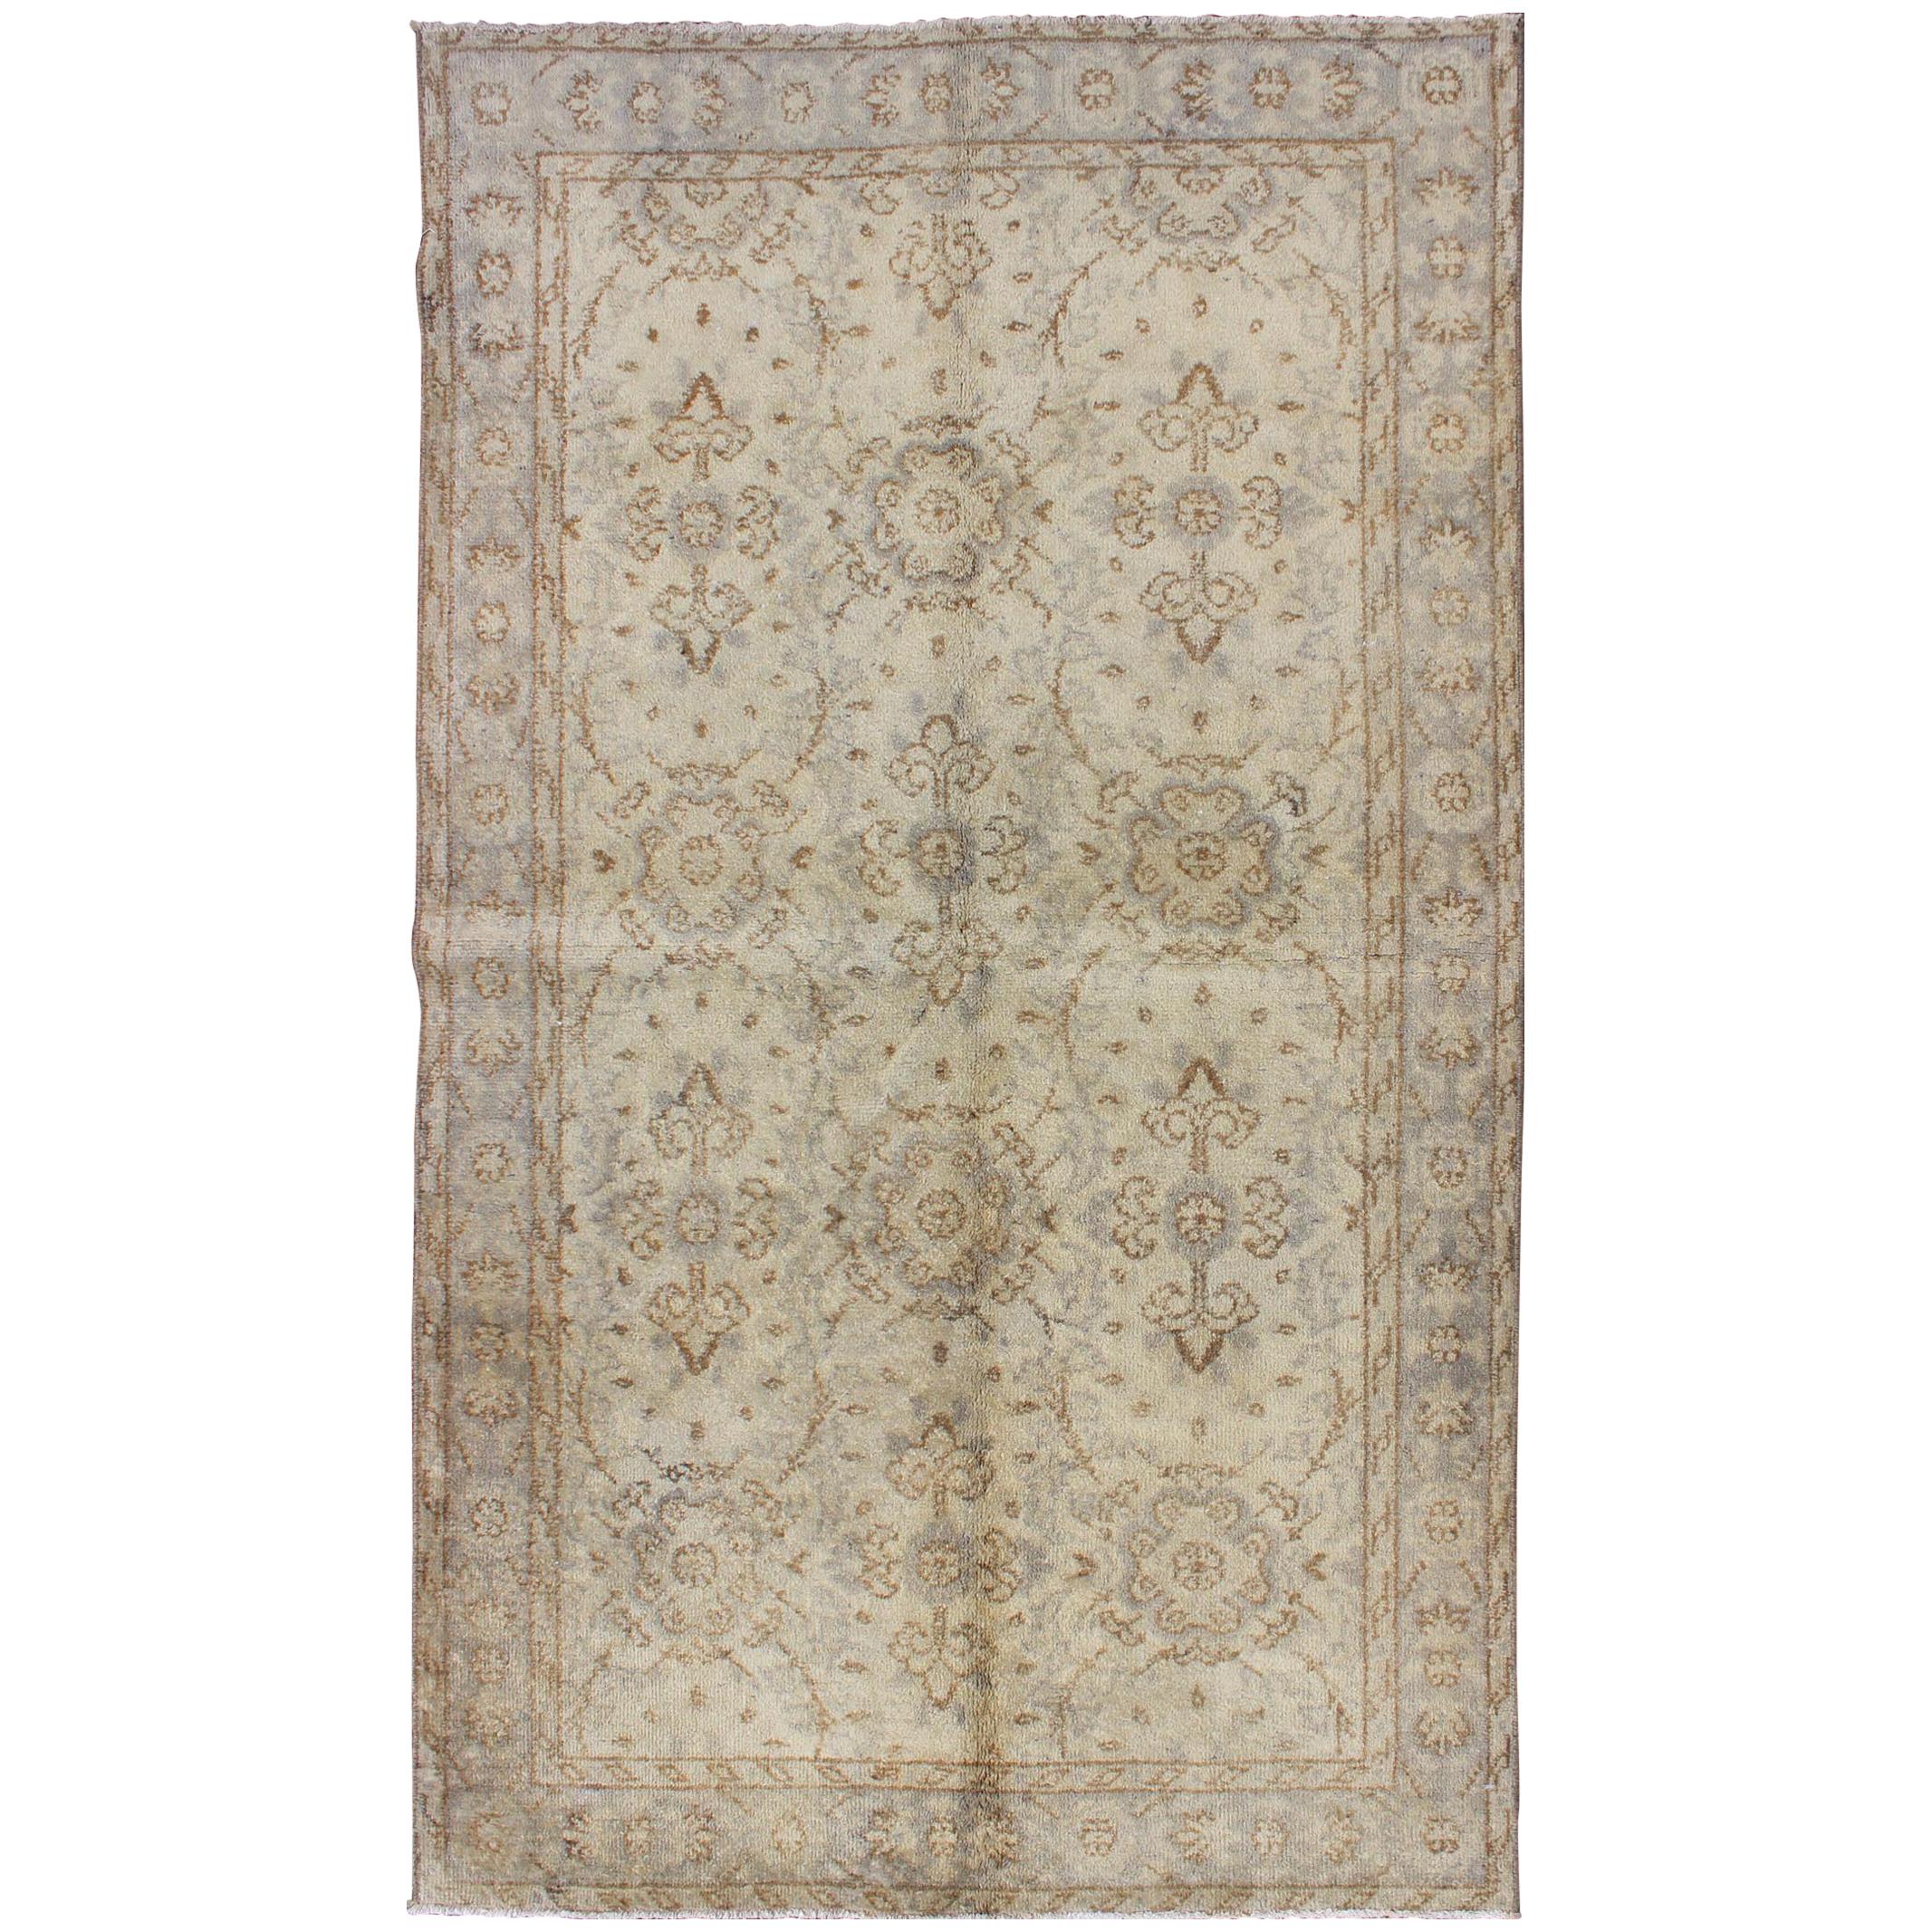 Vintage Turkish Oushak Rug with All-Over Floral Design in Ivory, Gray and Brown For Sale